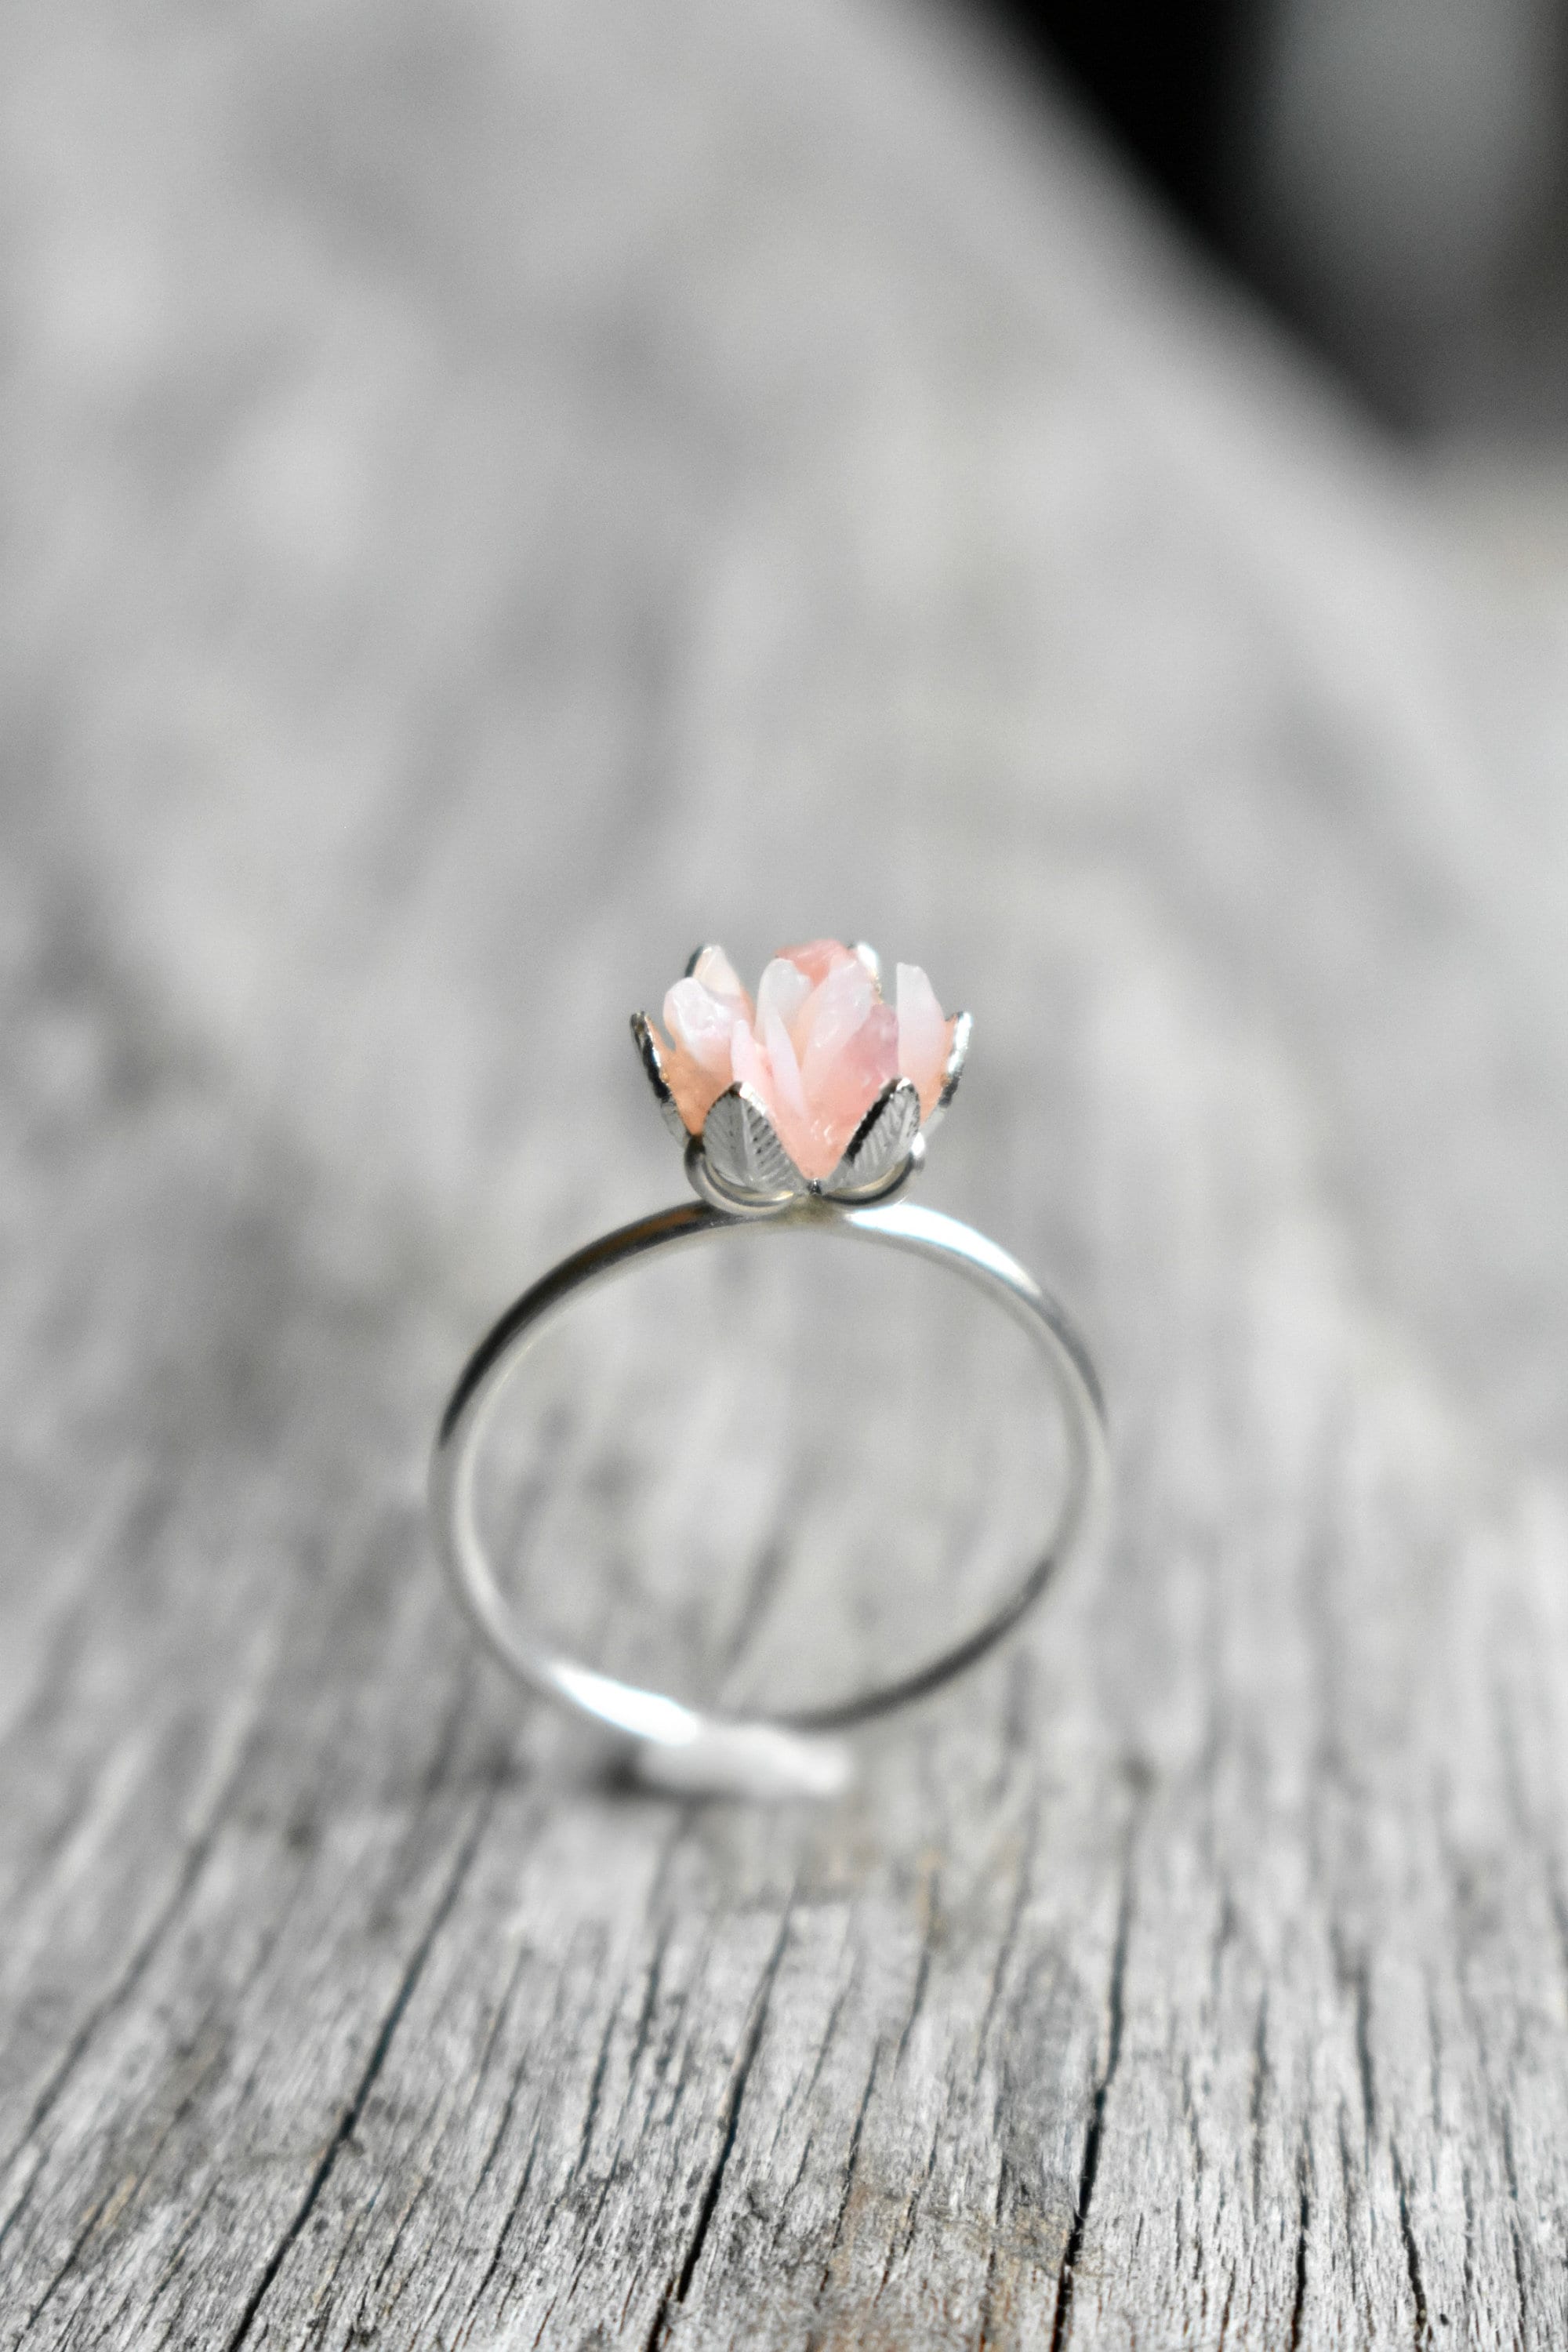 Unique Opal Ring, Peruvian Pink Opal Jewelry, Custom Uncut Opal Engagement Ring, Lotus Flower Ring in Silver, Raw Rough Fire Opal Jewelry